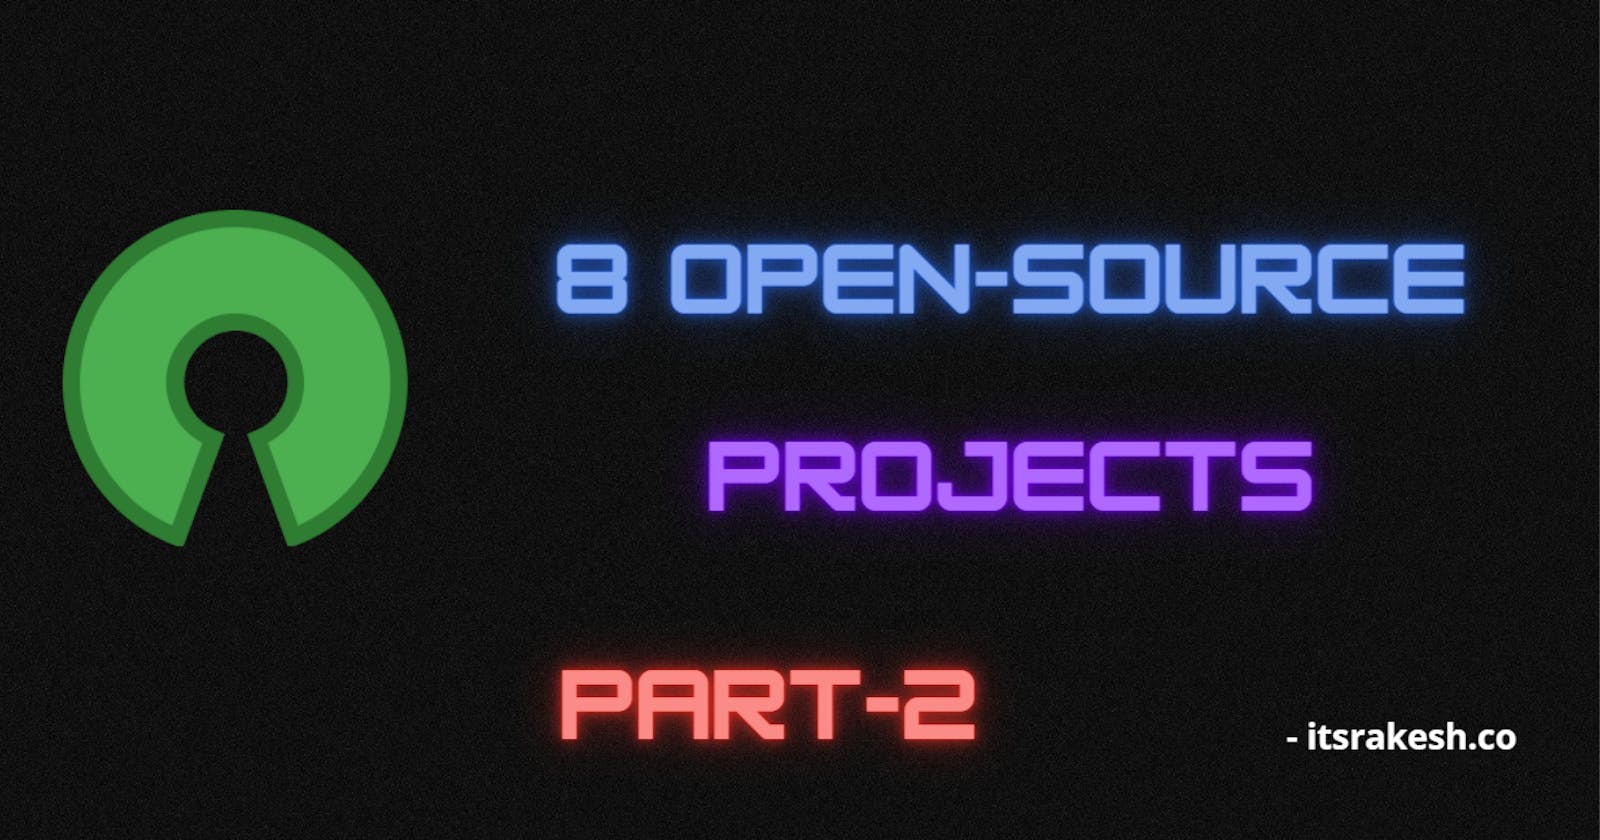 [PART 2] 8 best open source projects you should try out